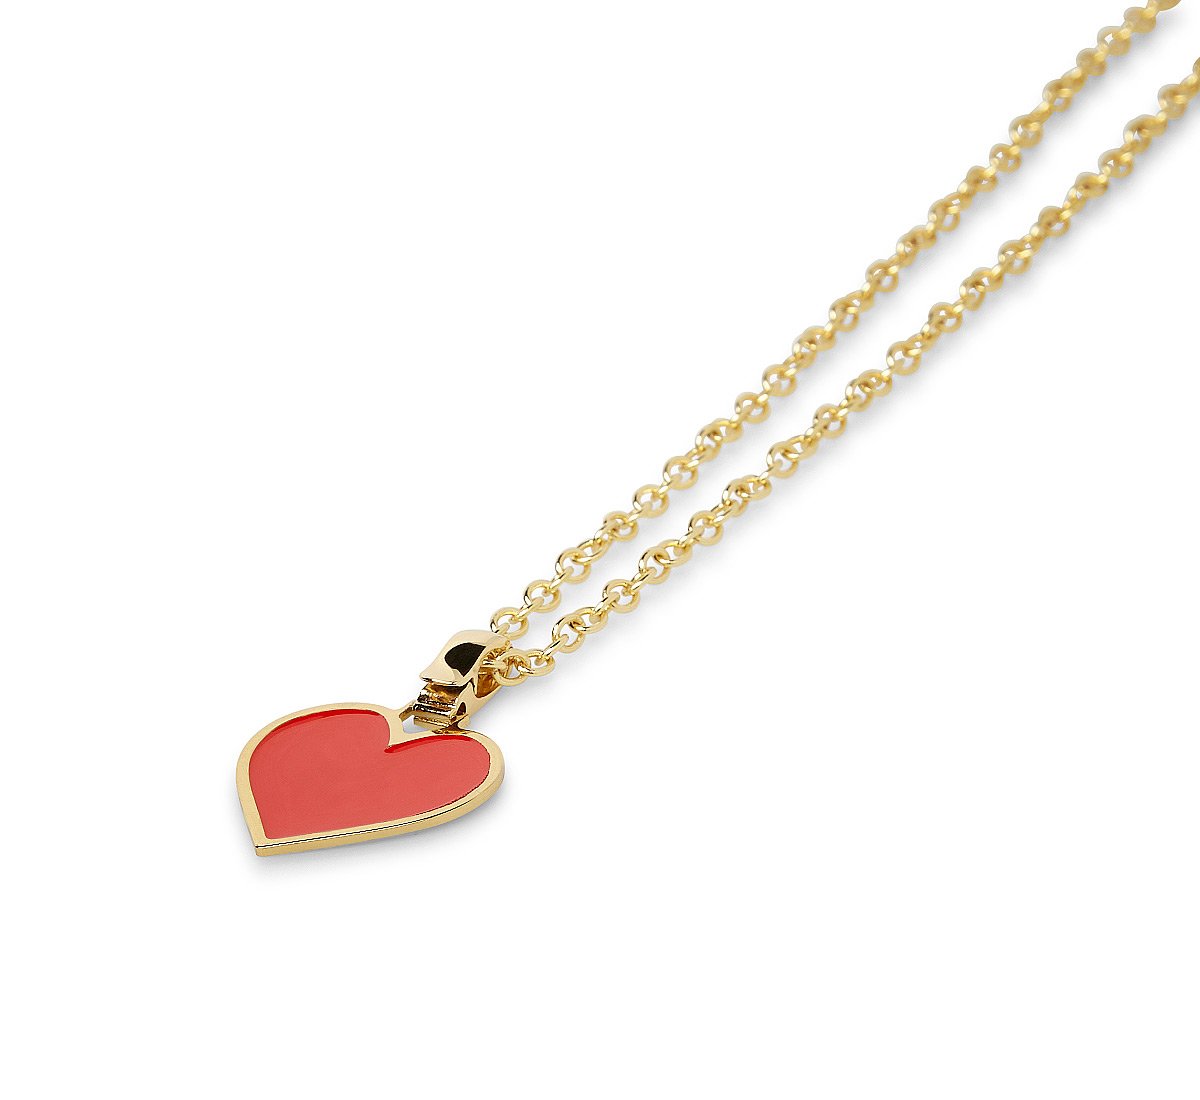 SMALL HEART PENDANT NECKLACE